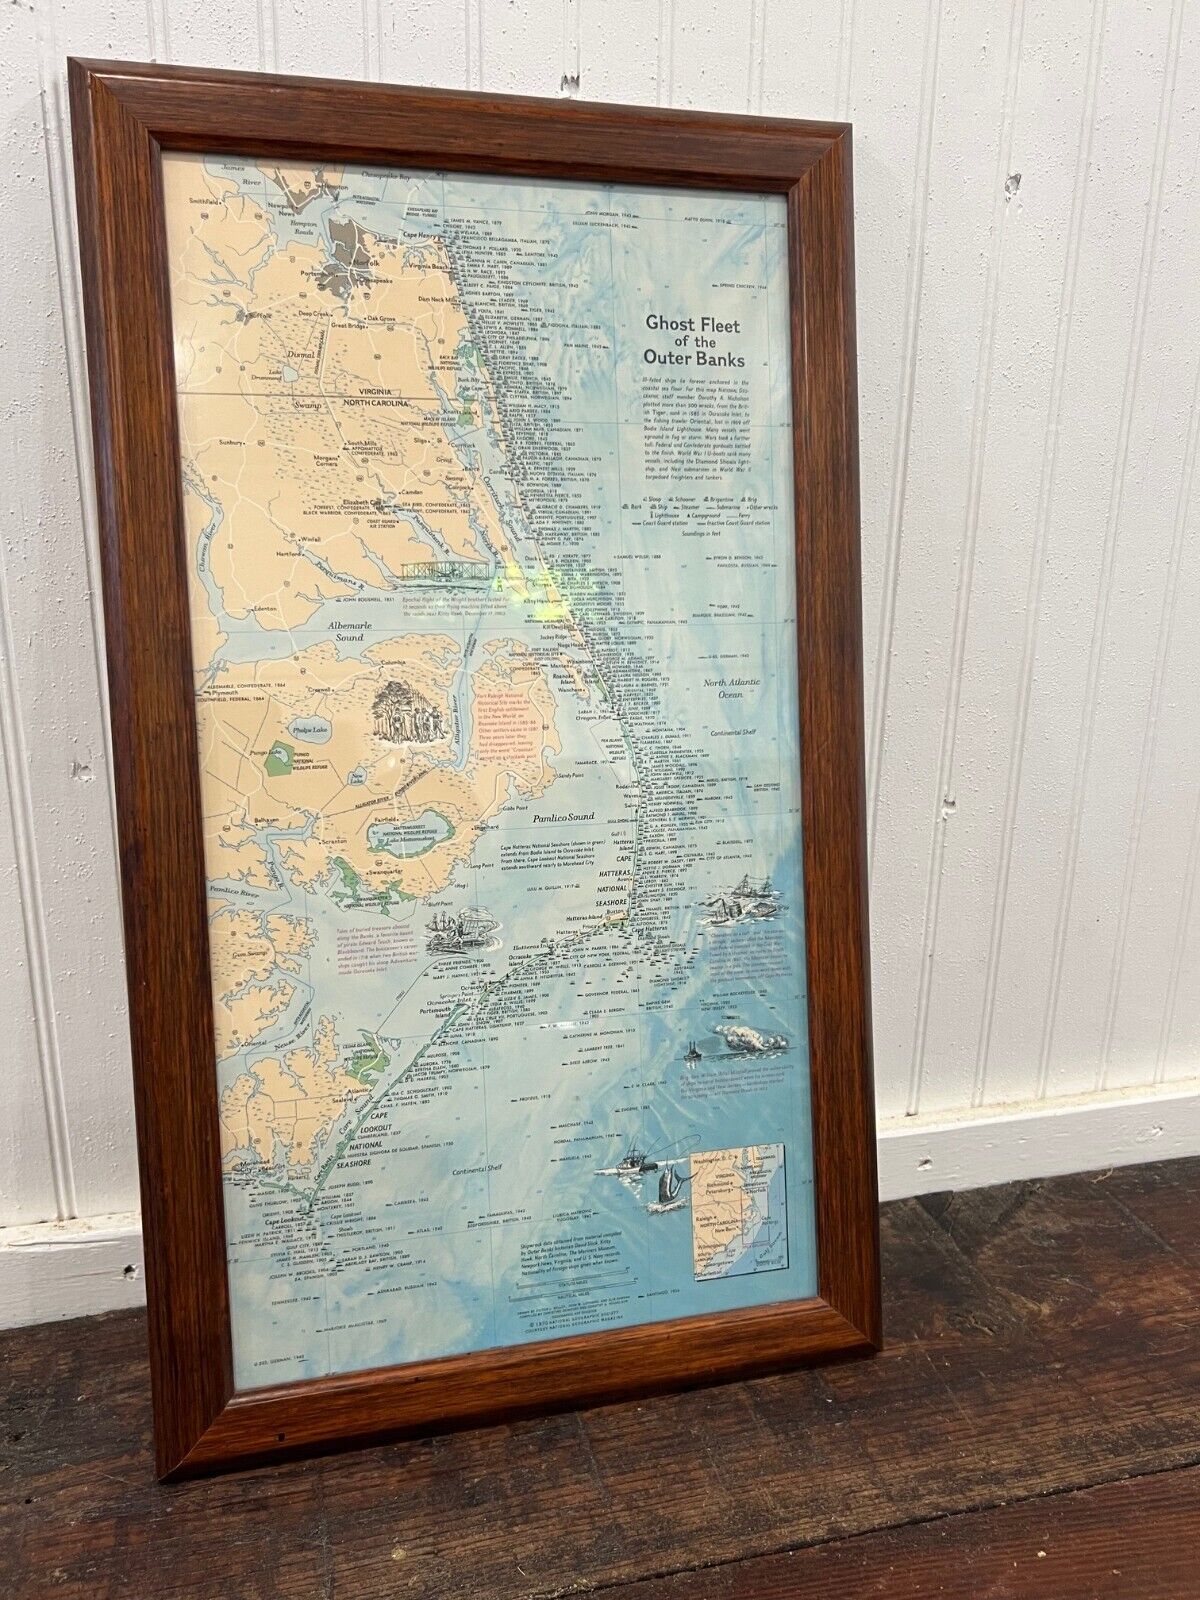 GHOST SHIPS FLEET OF THE OUTER BANKS MAP FRAMED SHOWING WRECK NAMES MARITIME